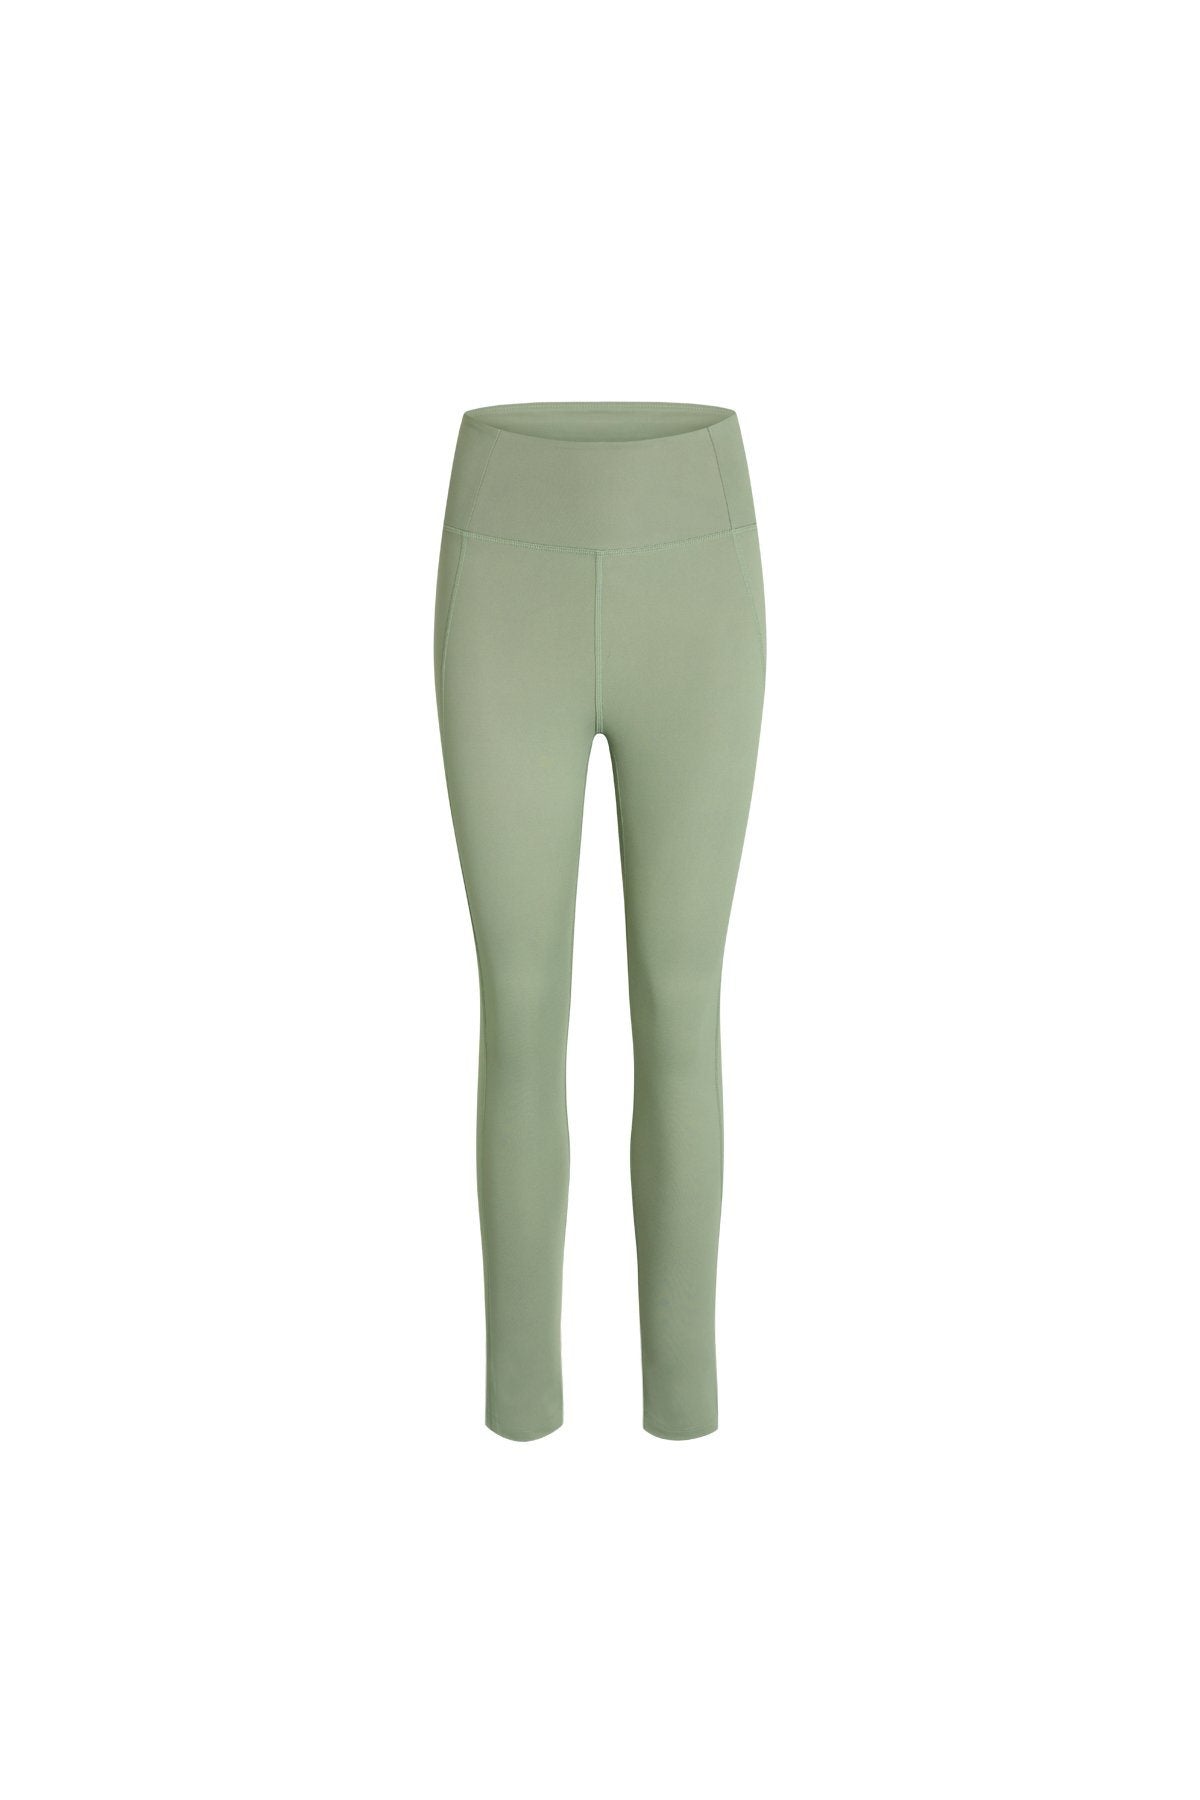 Girlfriend Collective W's Compressive Legging - Limited Colors - Made From Recycled Plastic Bottles Mantis Normal Pants